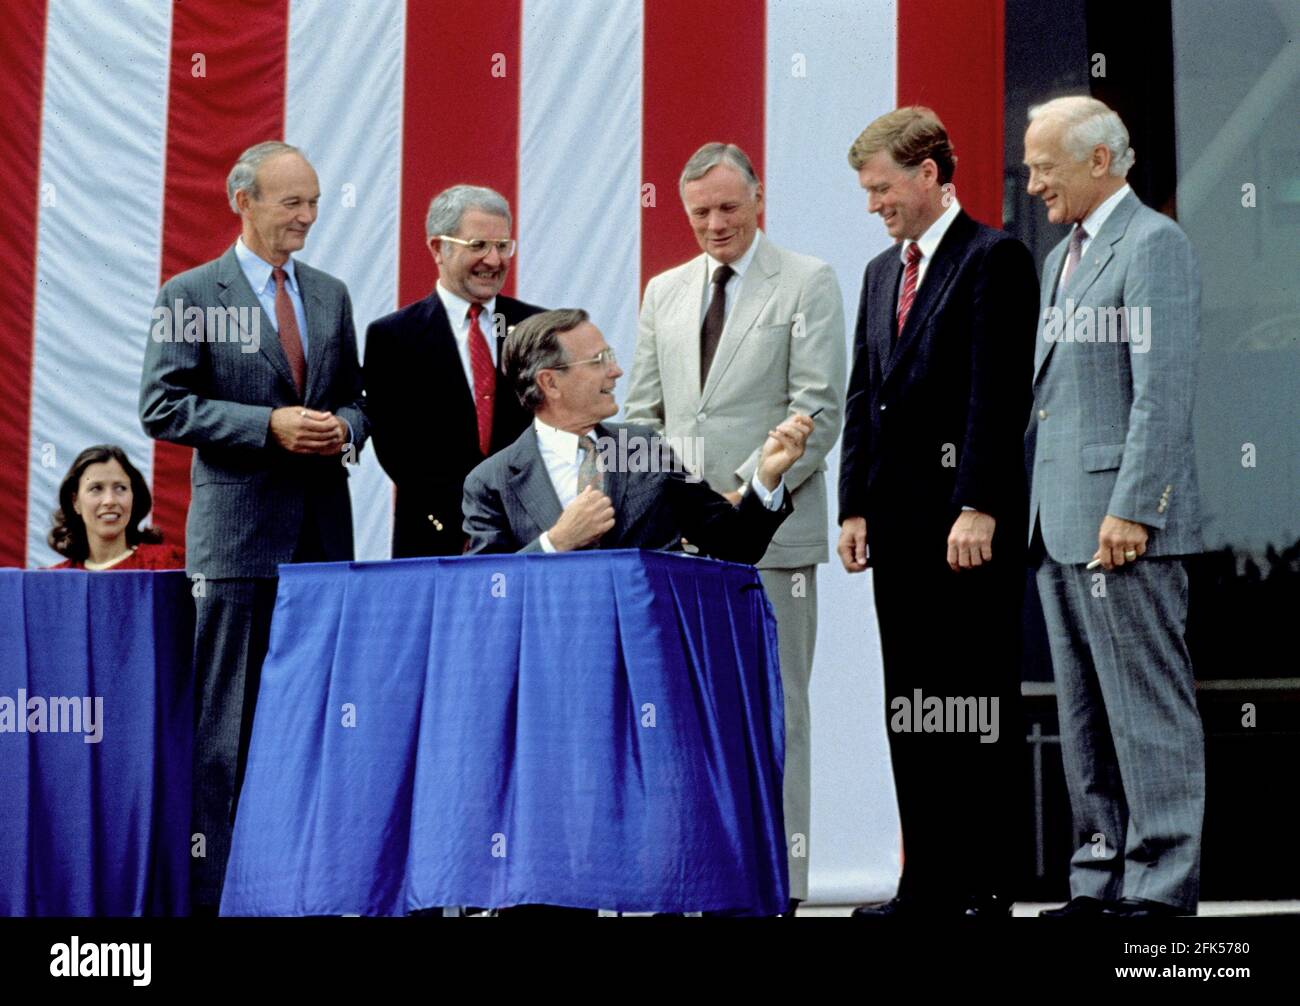 United States President George H.W. Bush signs a proclamation after announcing plans for the Space Exploration Initiative (SEI) on the the 20th anniversary of the Apollo 11 Moon landing at the National Air and Space Museum in Washington, DC on July 20, 1989. From left to right: Marilyn Quayle (seated); Apollo 11 Command Module pilot Michael Collins; NASA Administrator Richard H. Truly; President Bush; Apollo 11 Command pilot Neil A. Armstrong; U.S. Vice President Dan Quayle; and Apollo 11 Lunar Module pilot Edwin (Buzz) Aldrin.Credit: Robert Trippett/Pool via CNP | usage worldwide Stock Photo